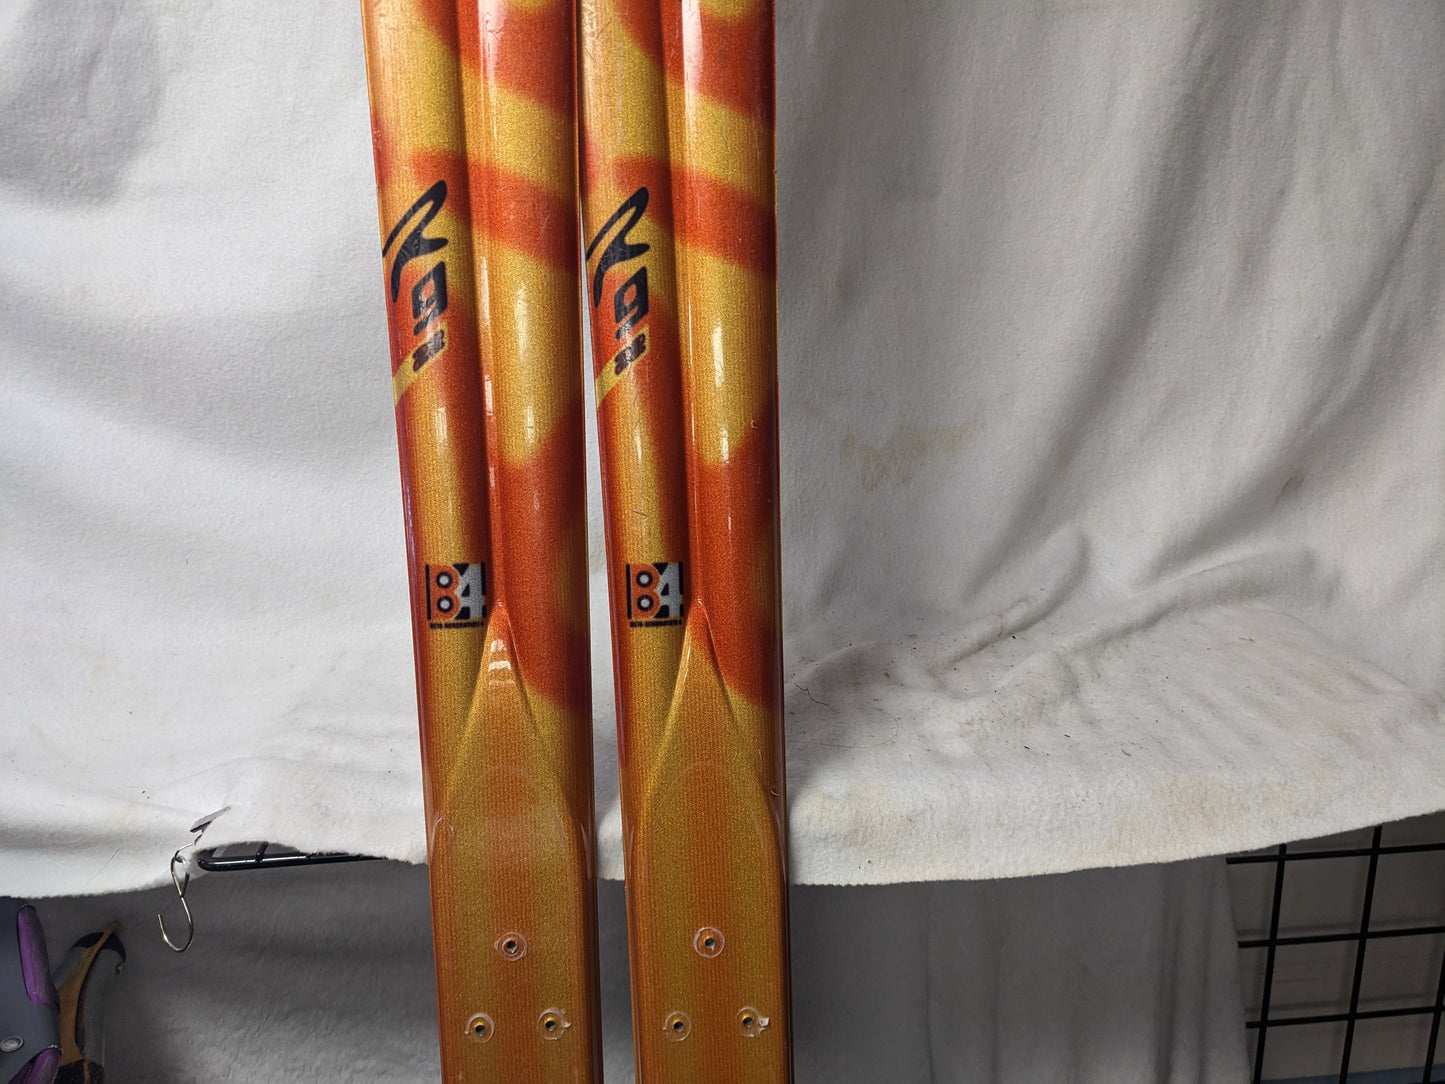 Atomic Beta Ride R9 22 Skis *No Bindings* Size 170 Cm Color Orange Condition Used